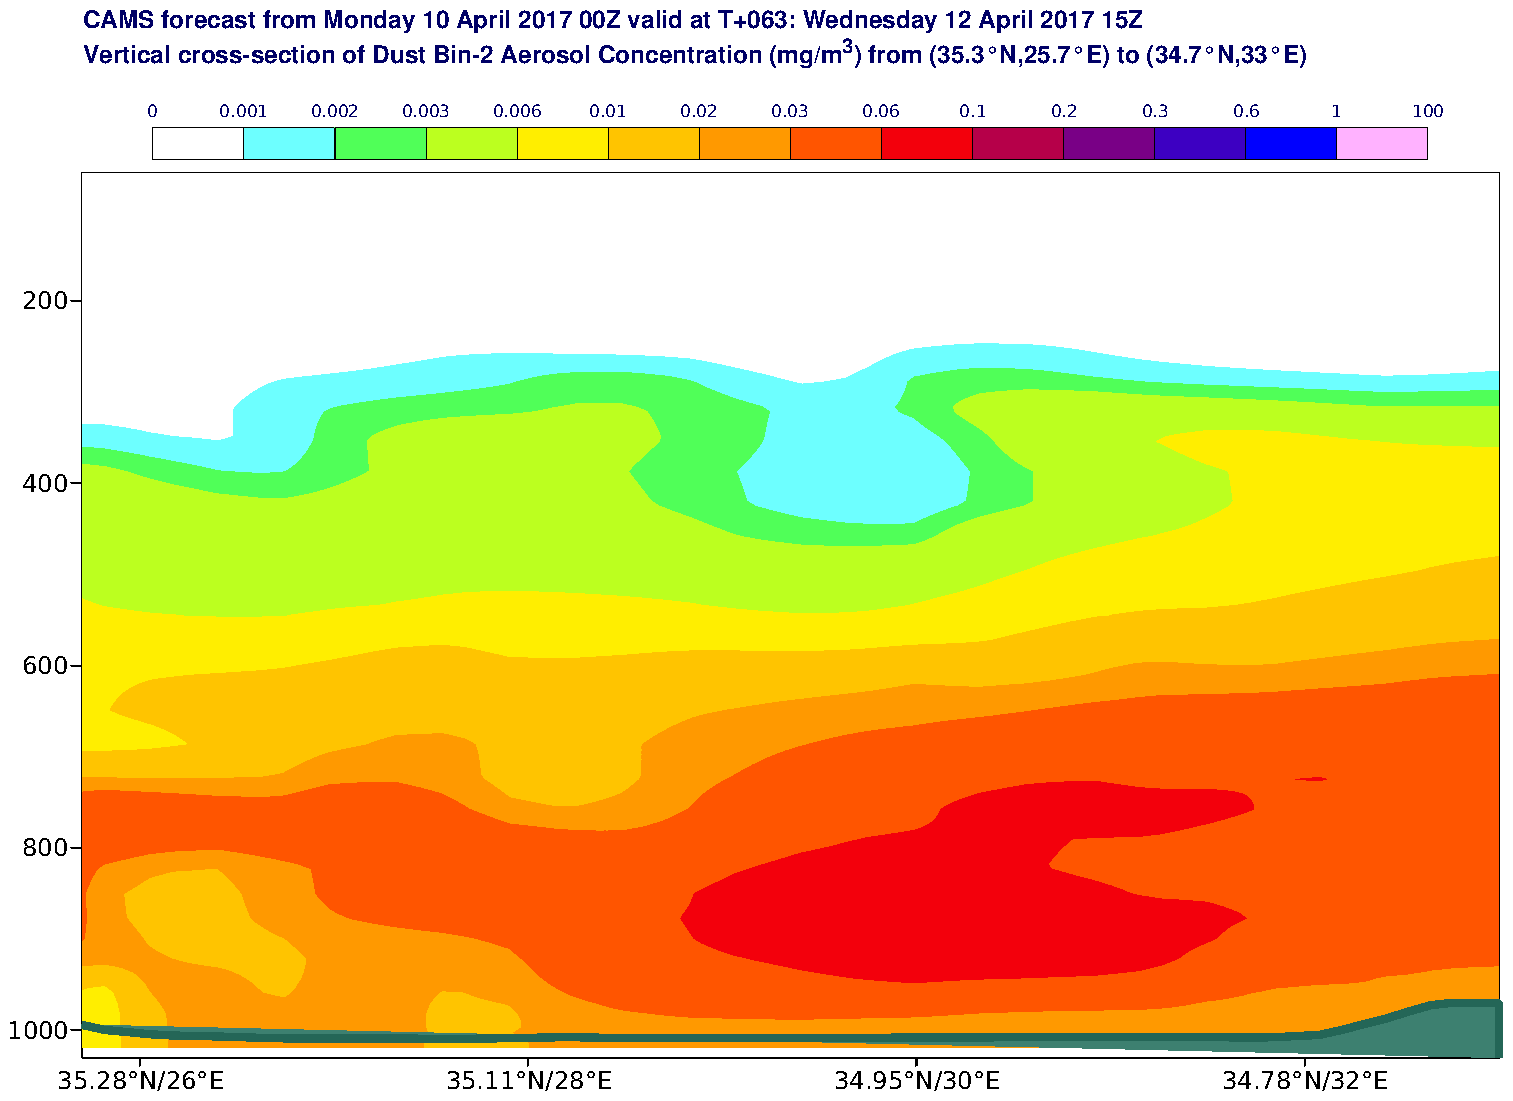 Vertical cross-section of Dust Bin-2 Aerosol Concentration (mg/m3) valid at T63 - 2017-04-12 15:00